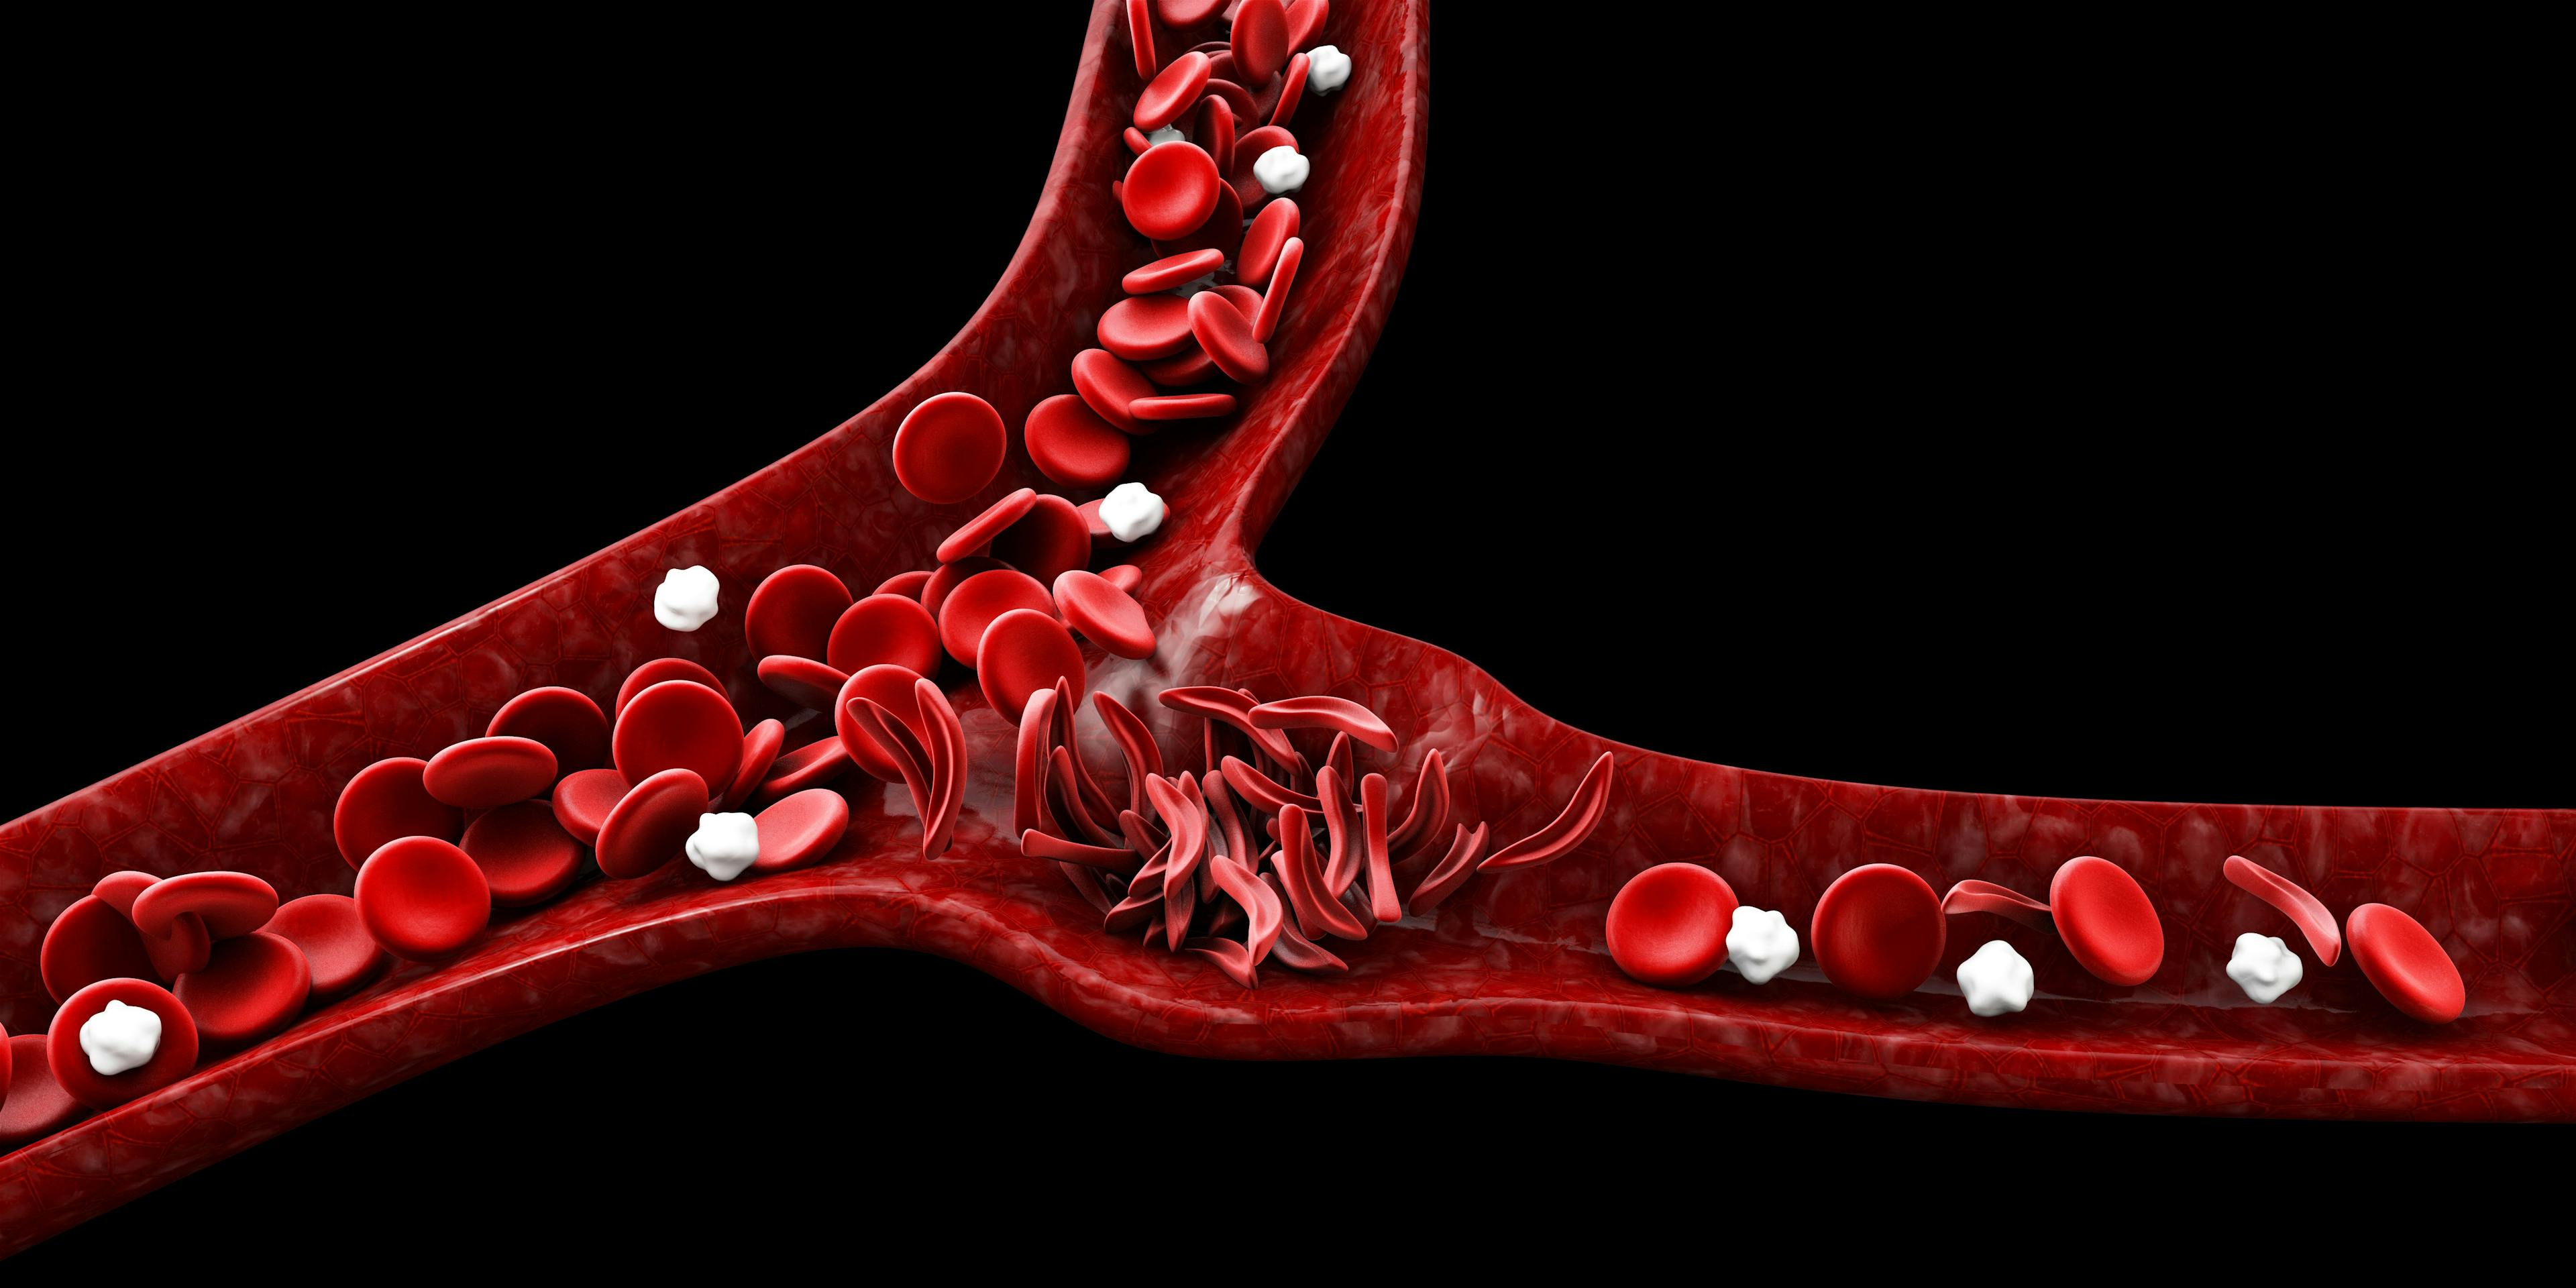 Sickle cell anemia, 3D illustration showing blood vessel with normal and deformed crescent - Image credit: Tussik | stock.adobe.com 